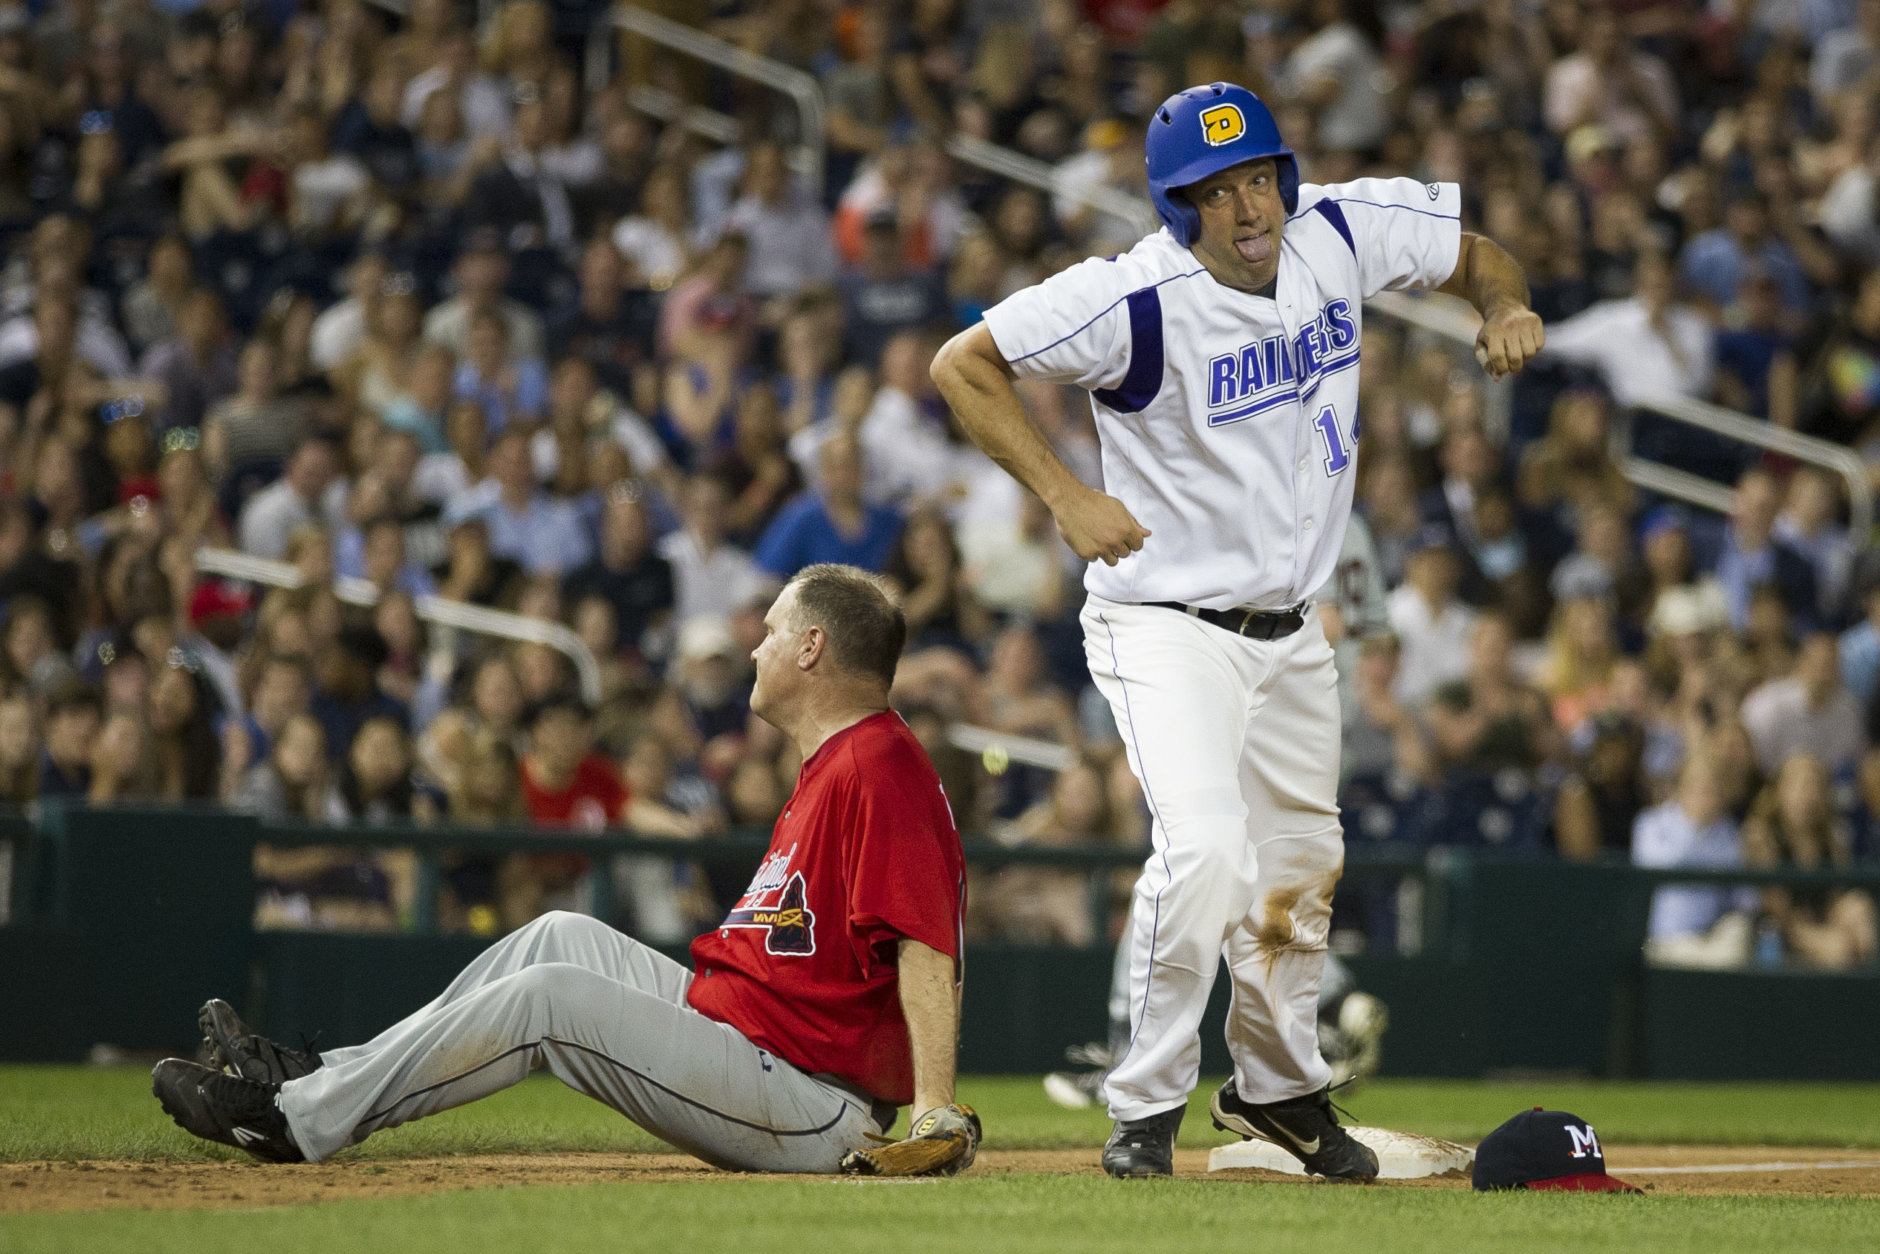 Rep. Tim Ryan, D-Ohio, right, heads for home plate after colliding with Rep. Trent Kelly, R-Miss., after Ryan stole third base during the 57th Congressional Baseball Game at National's Park in Washington, Thursday, June 14, 2018. Members of Congress played their annual baseball game Thursday night - a year after some Republican players and others were wounded in a shooting spree at a team practice in Virginia. (AP Photo/Cliff Owen)